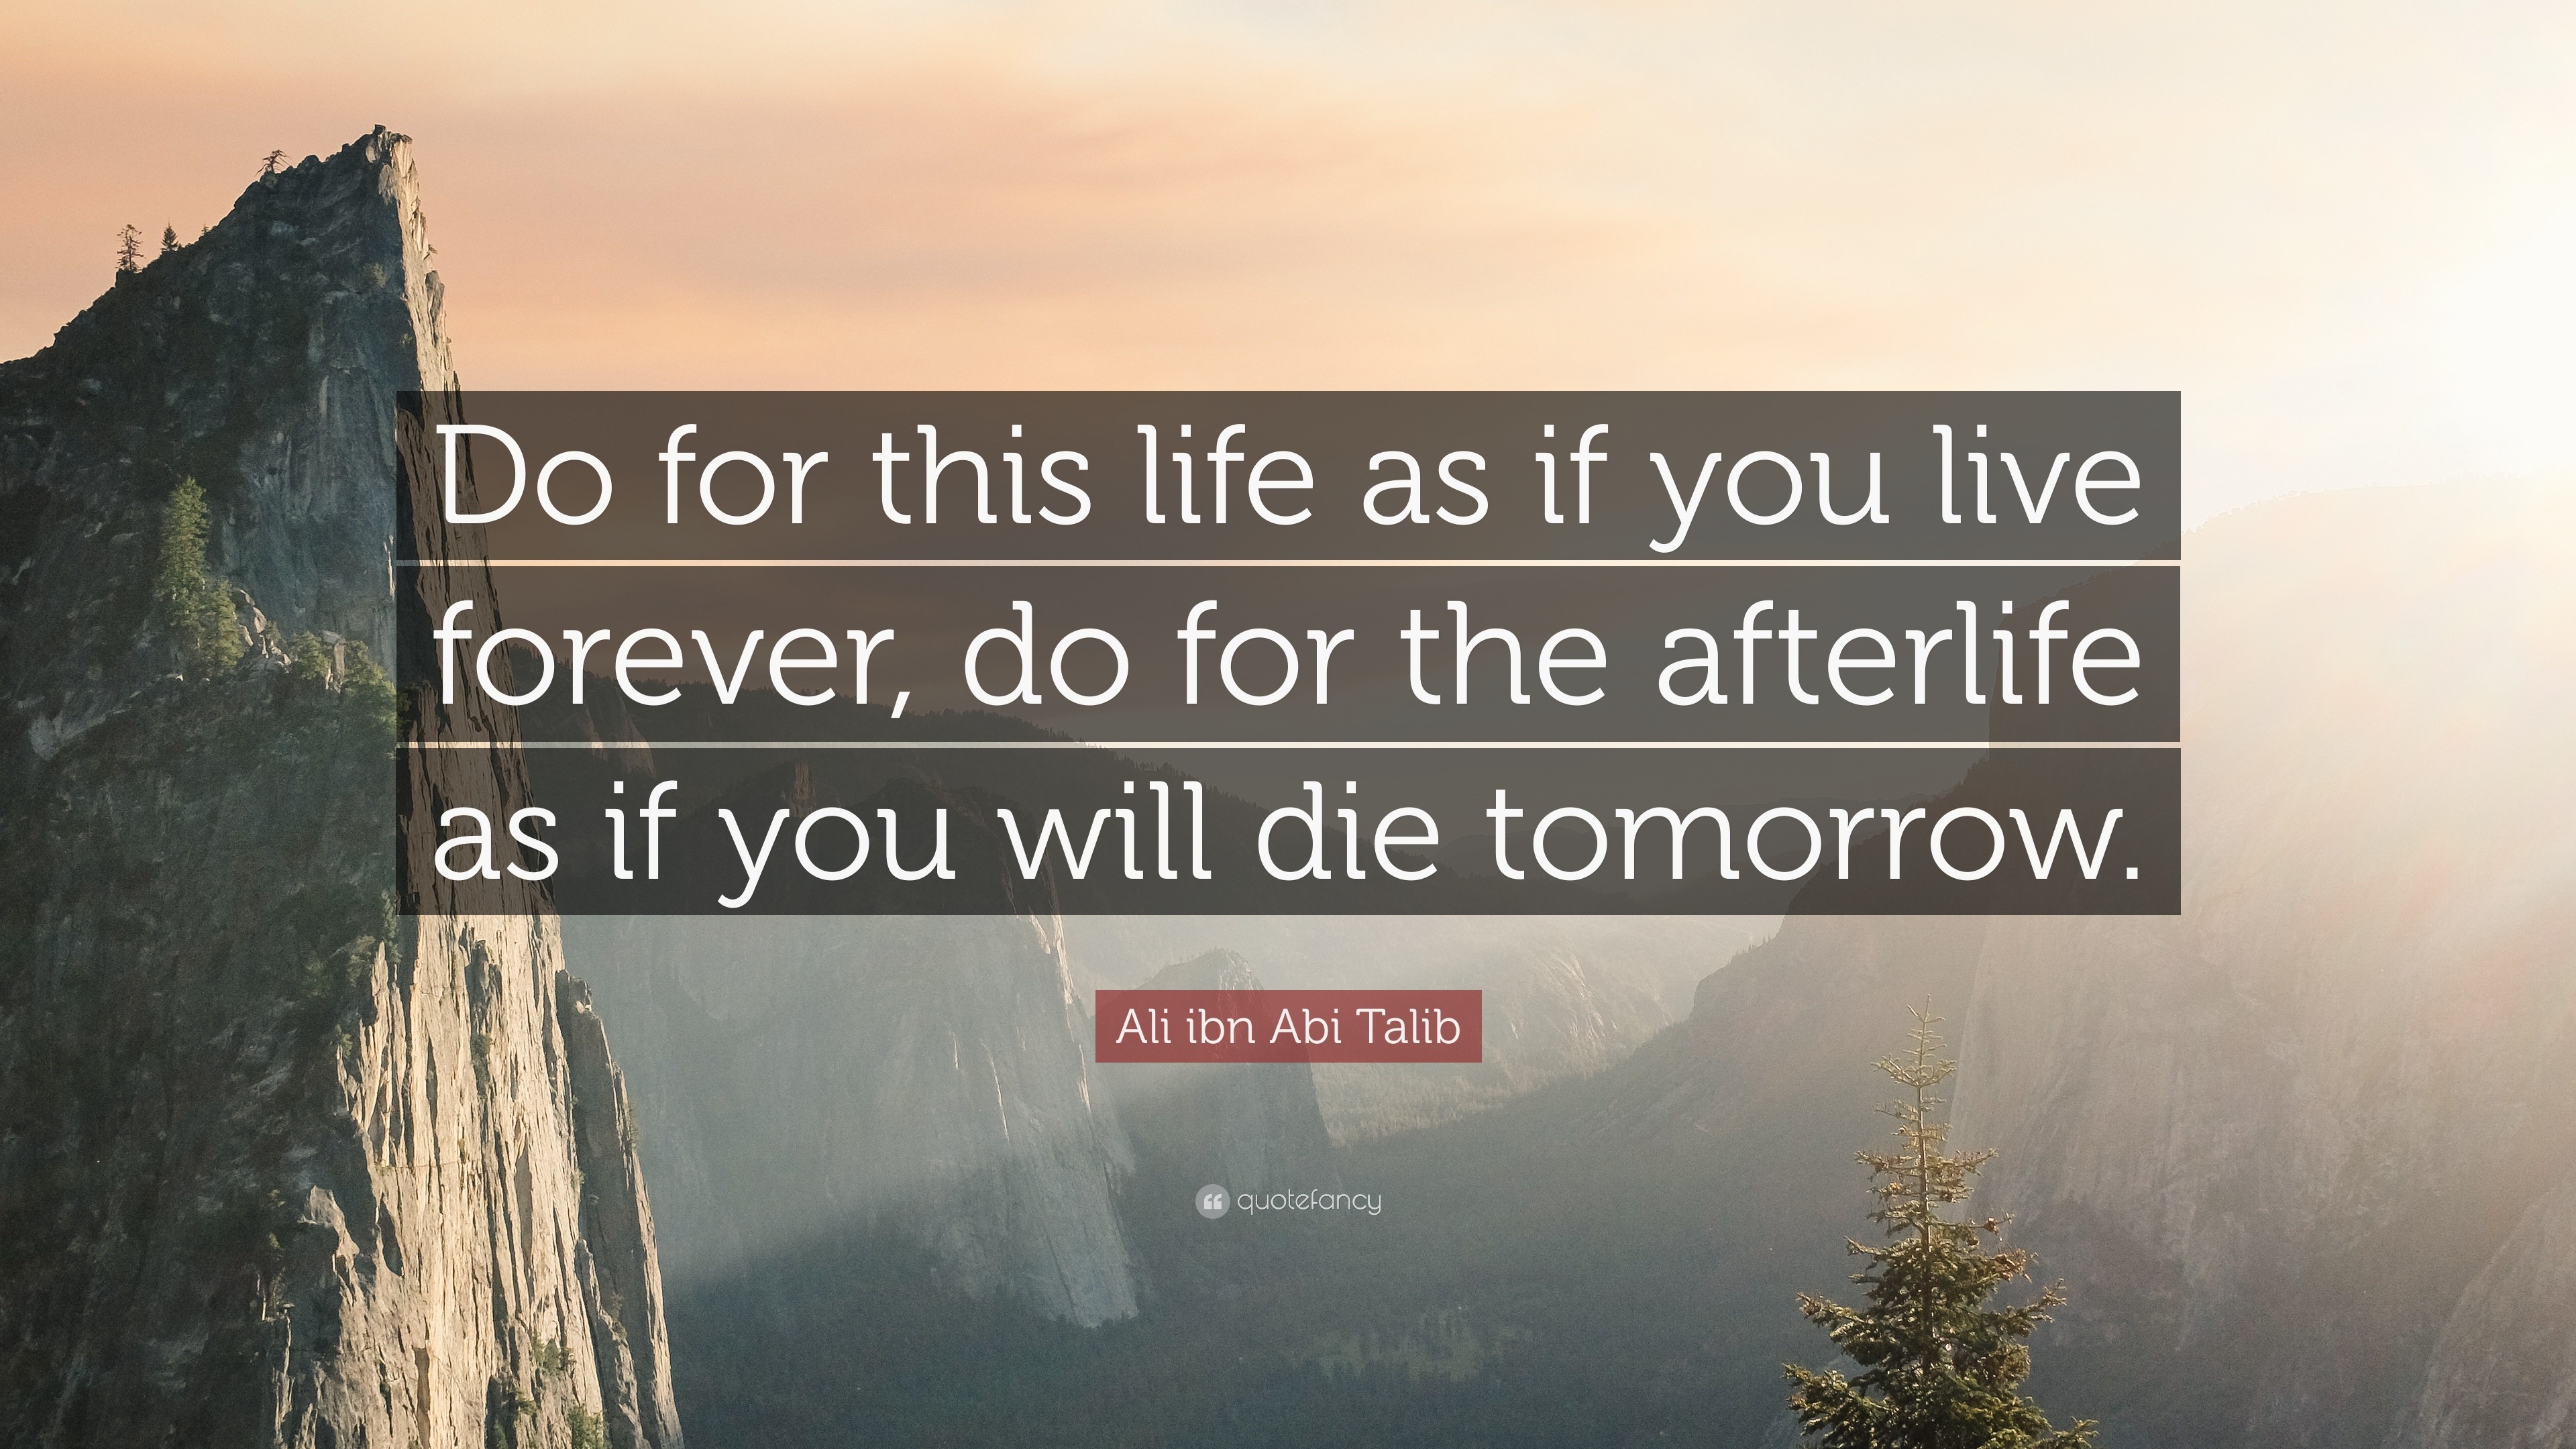 Ali Ibn Abi Talib Quote Do For This Life As If You Live Forever Do For